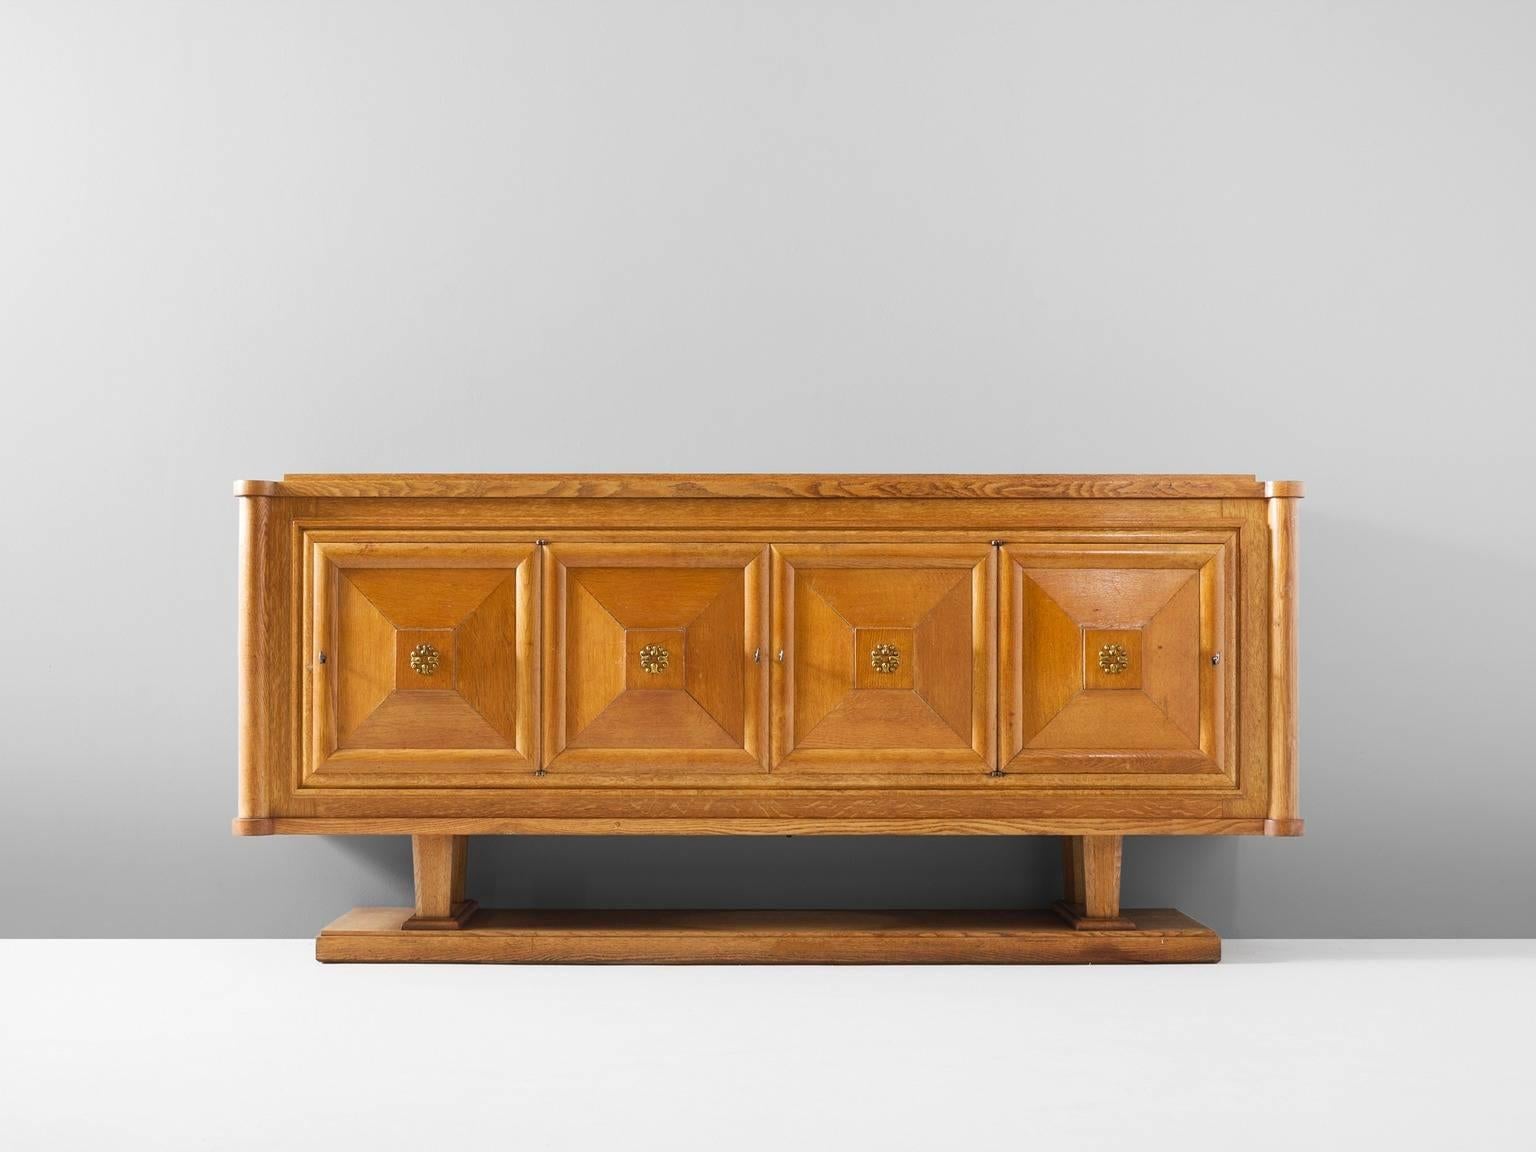 Credenza, in oak and brass, France, 1930s. 

Wide credenza in oak with brass details. Four doors, all with beautifully designed wooden graphical patterns. The diagonal lines with added squares and a frame emphasize the three-dimensional character